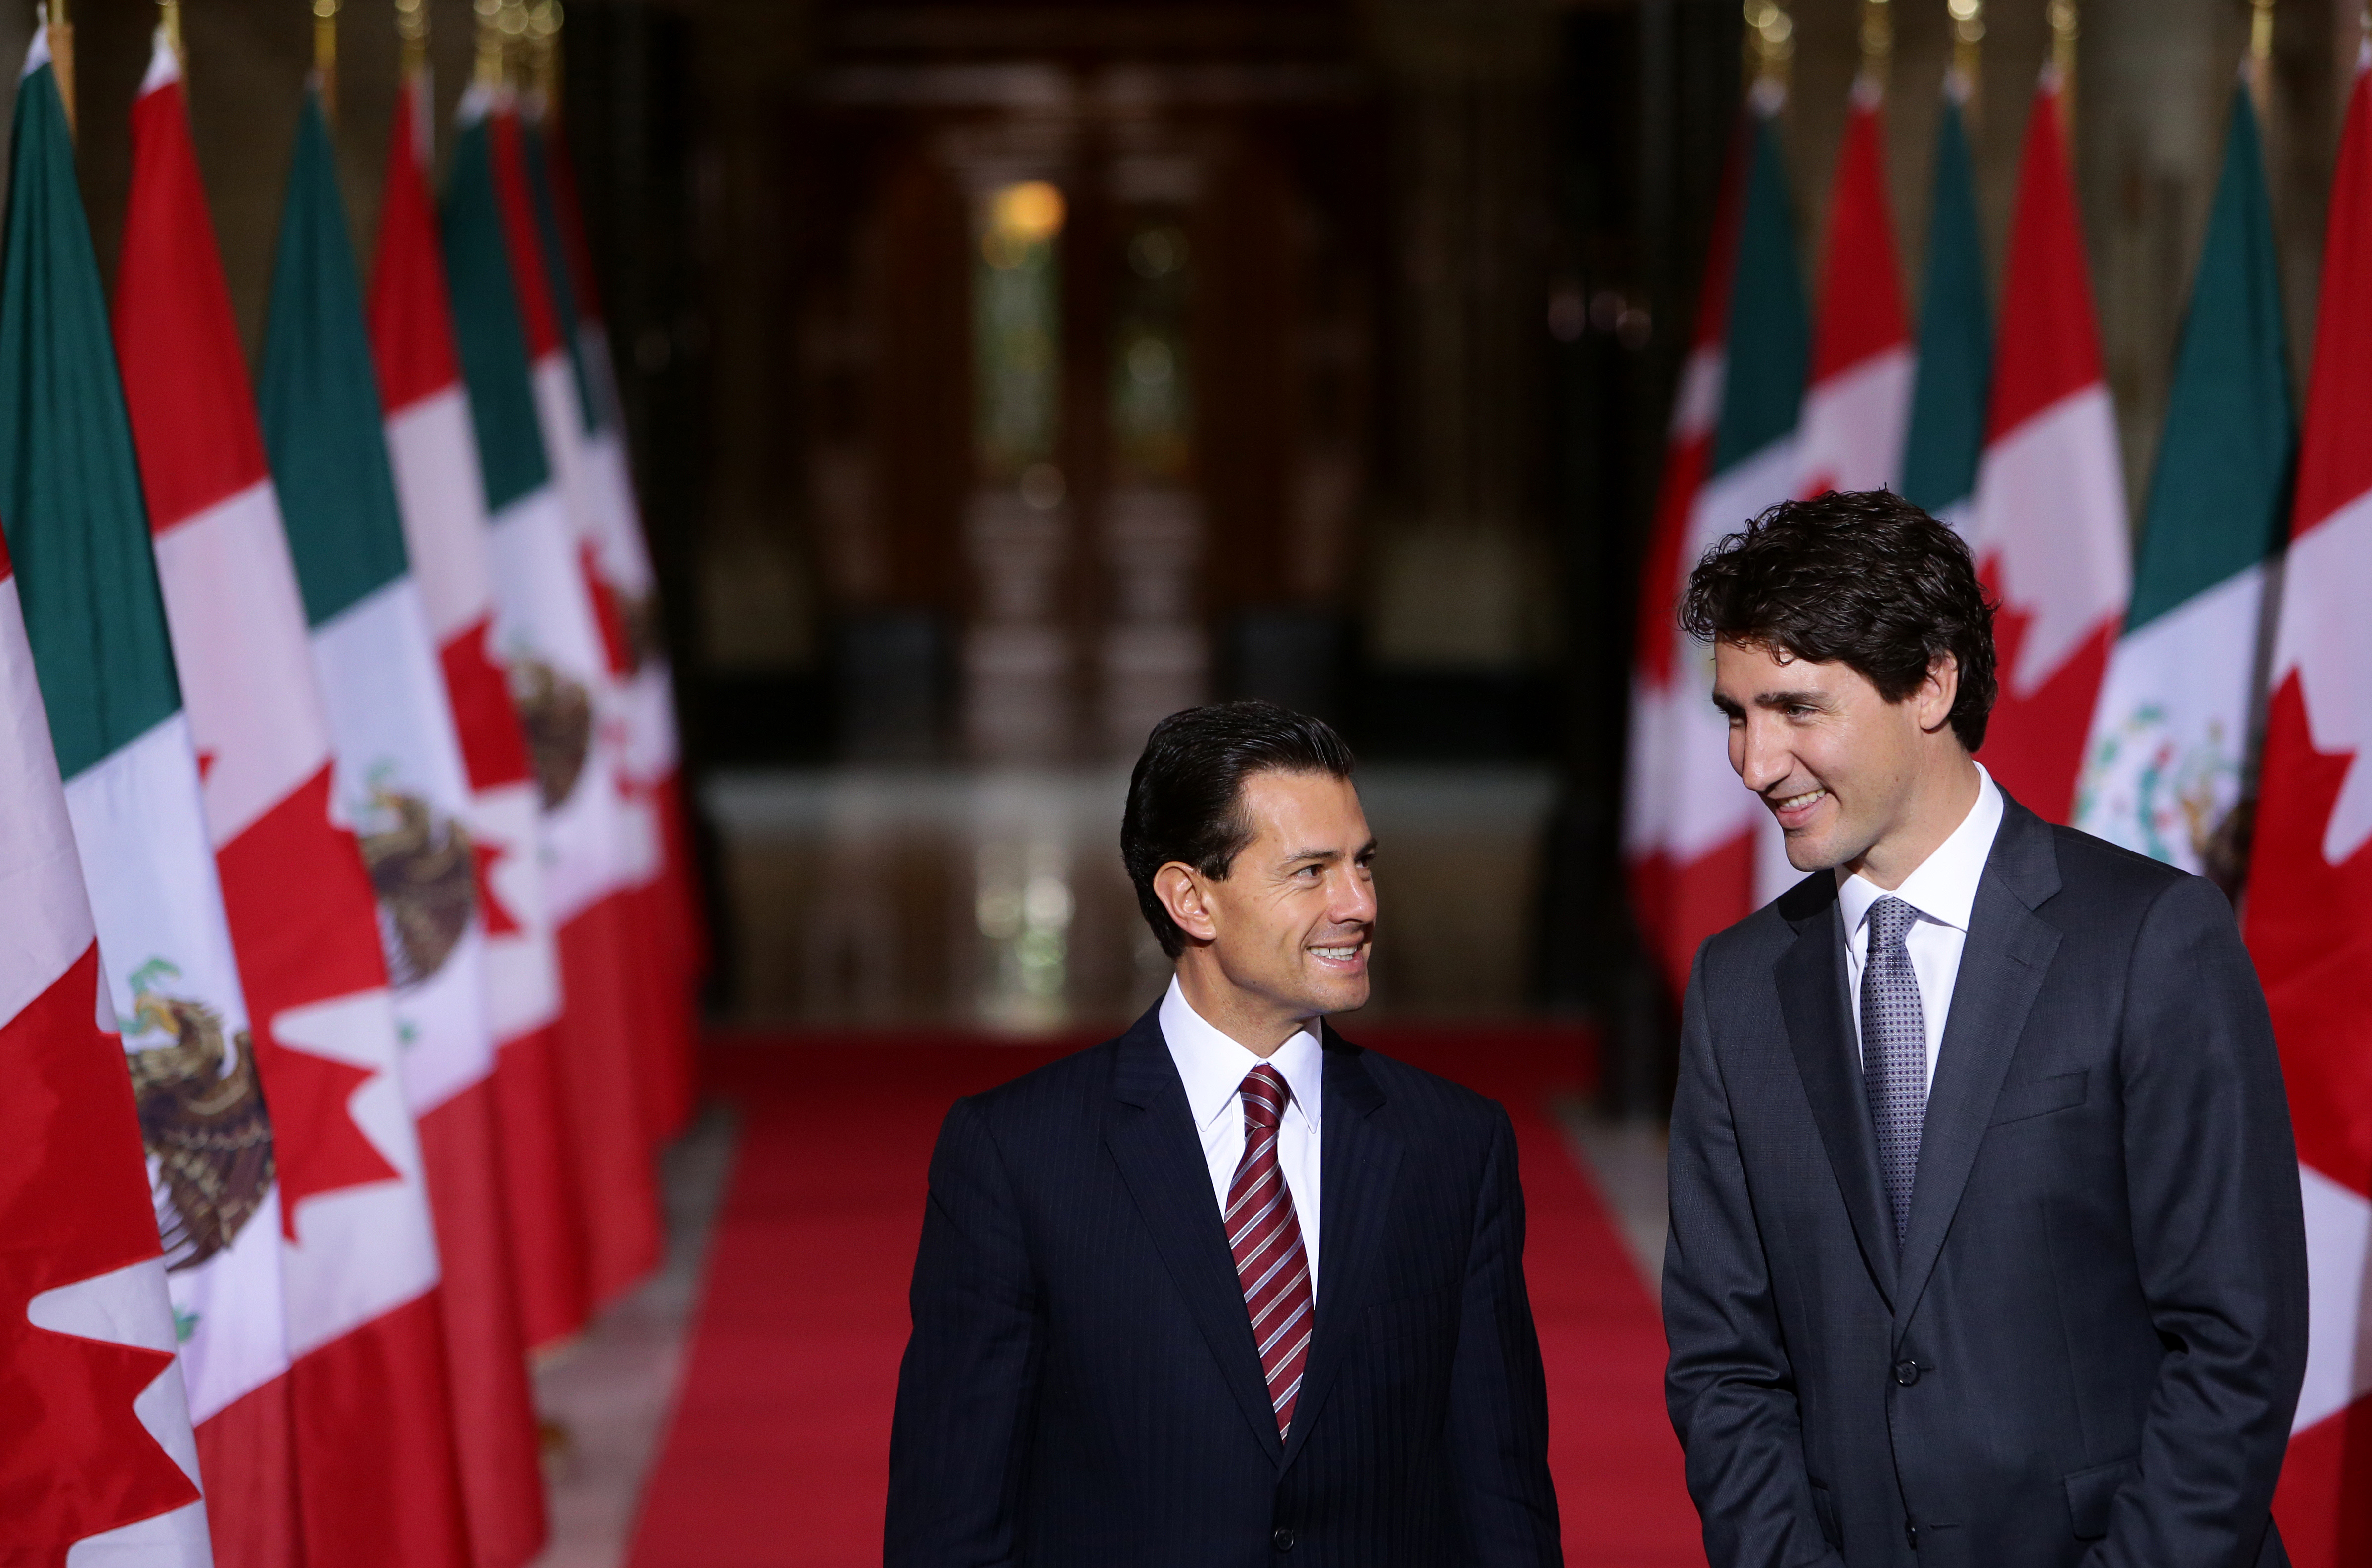 Mexican President Enrique Pena Nieto Arrives For The North American Leaders Summit